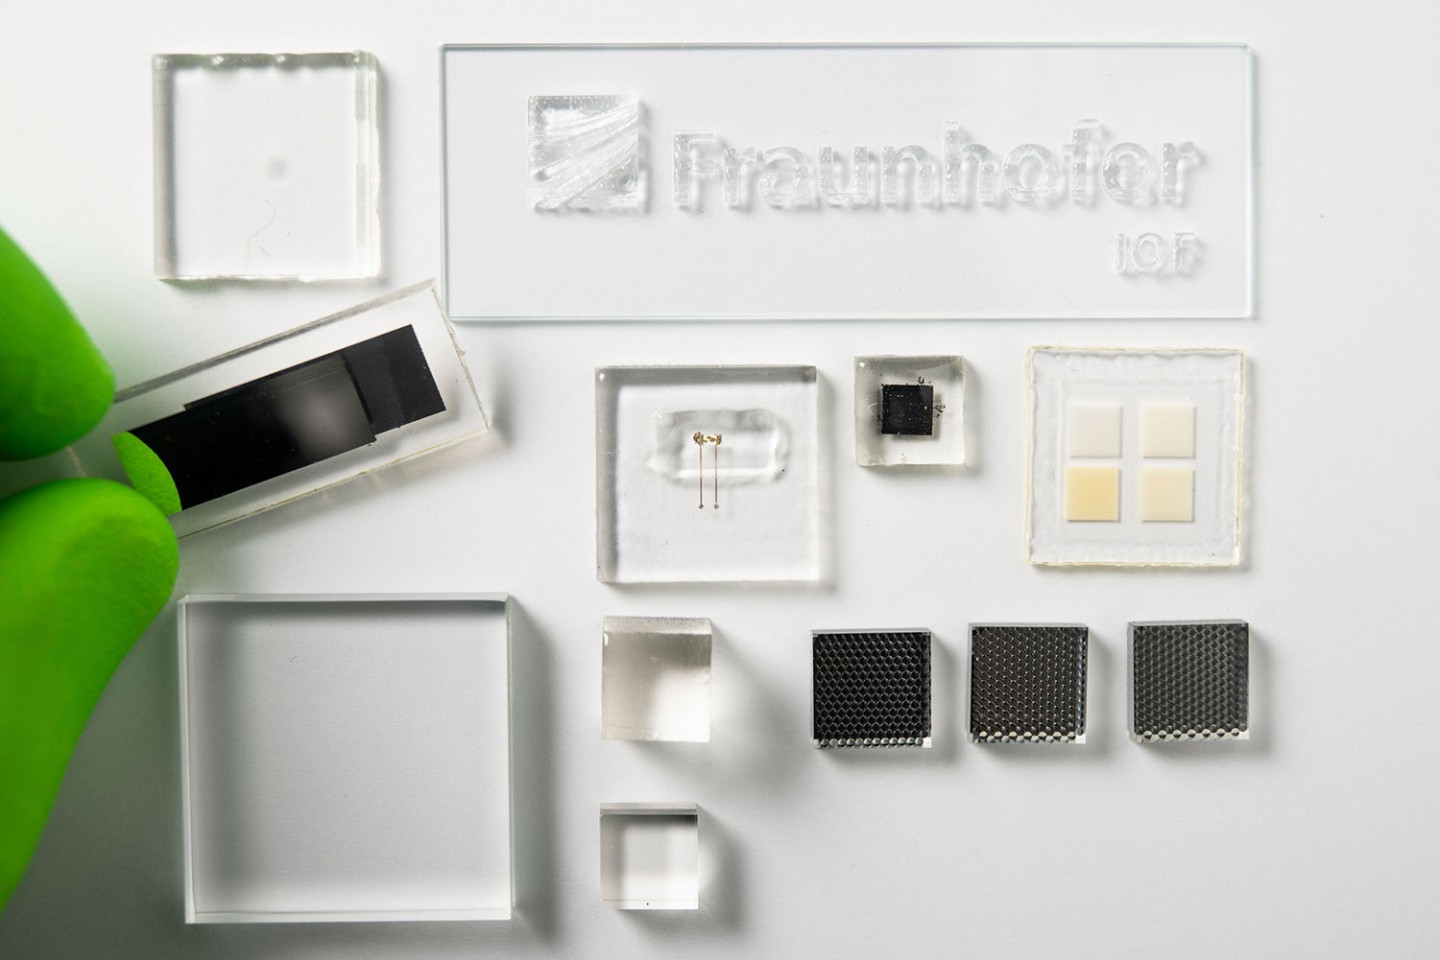 Components like these are used in the additive inkjet printing process, for example, for lab-on-a-chip systems.